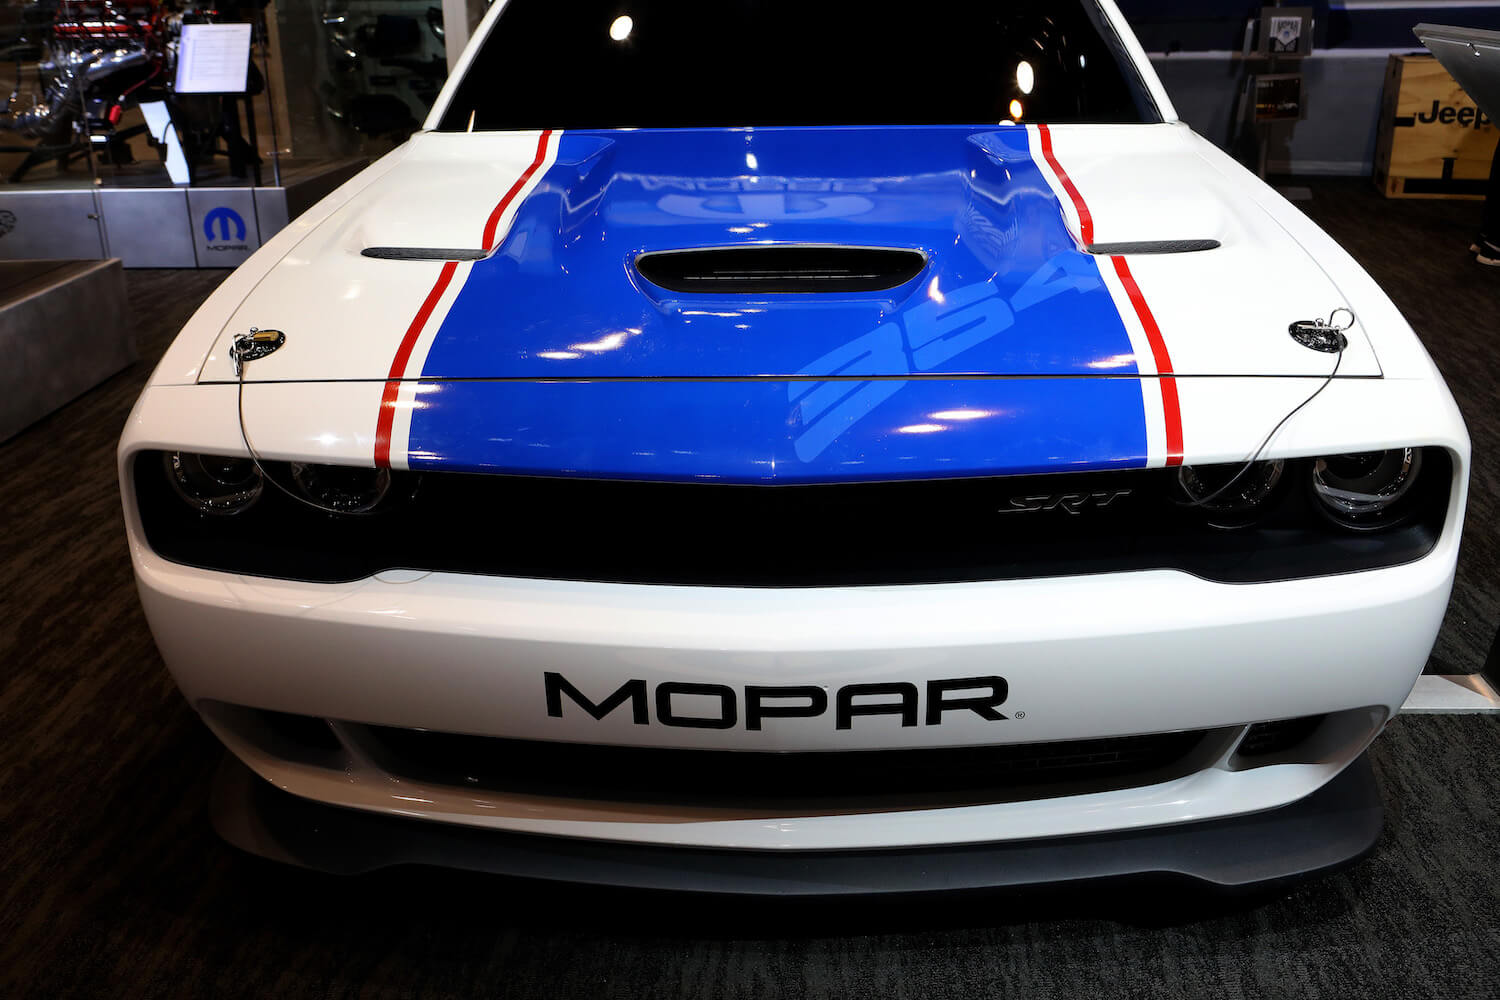 White and blue Challenger Drag Pak built by the Mopar performance division.